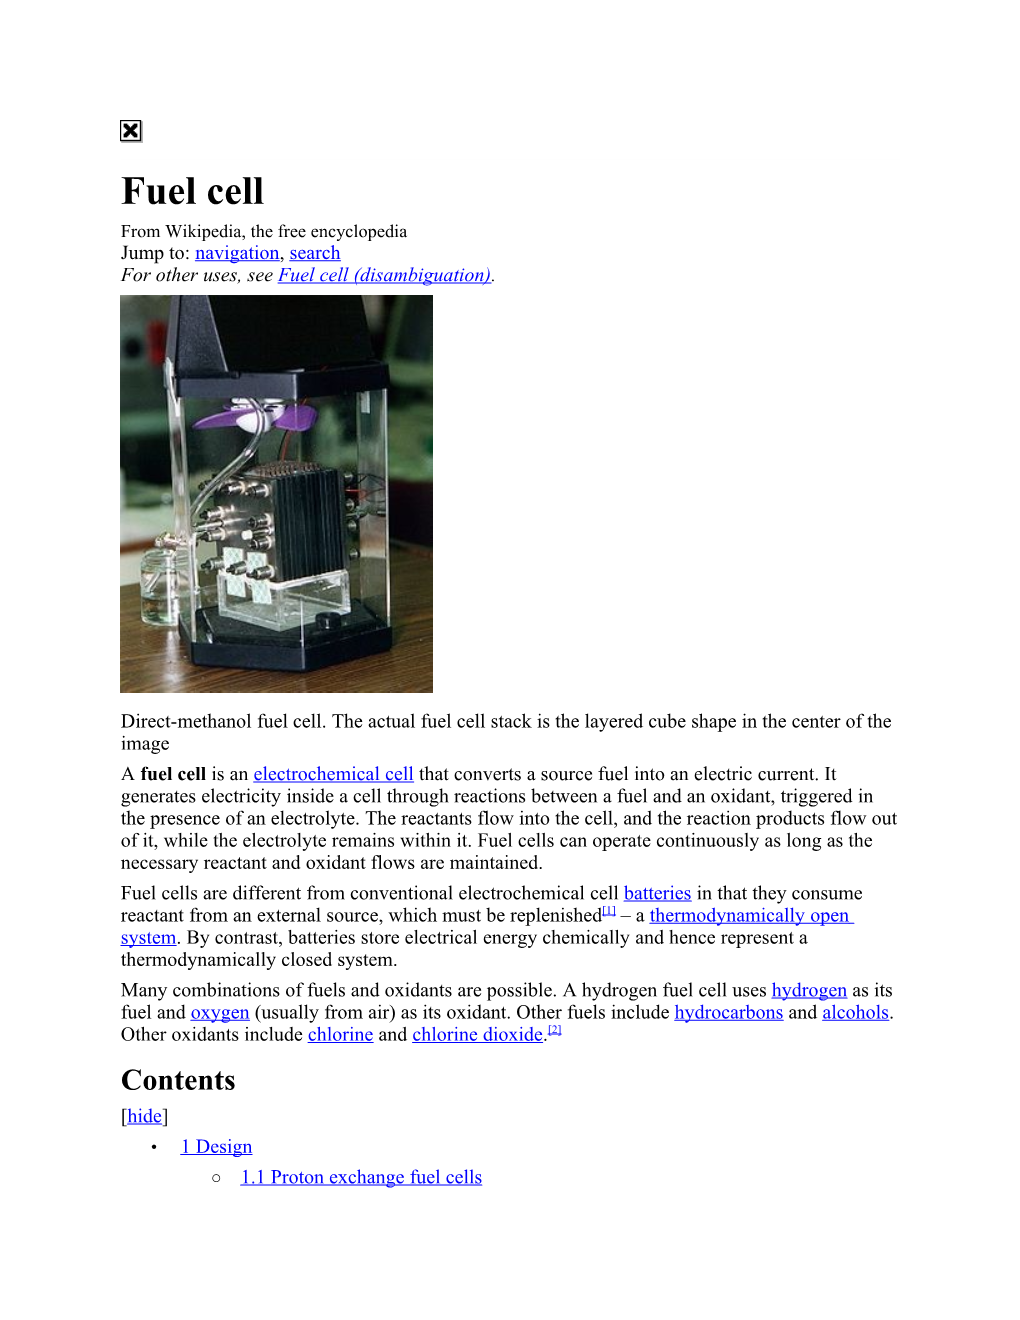 Fuel Cell from Wikipedia, the Free Encyclopedia Jump To: Navigation, Search for Other Uses, See Fuel Cell (Disambiguation)